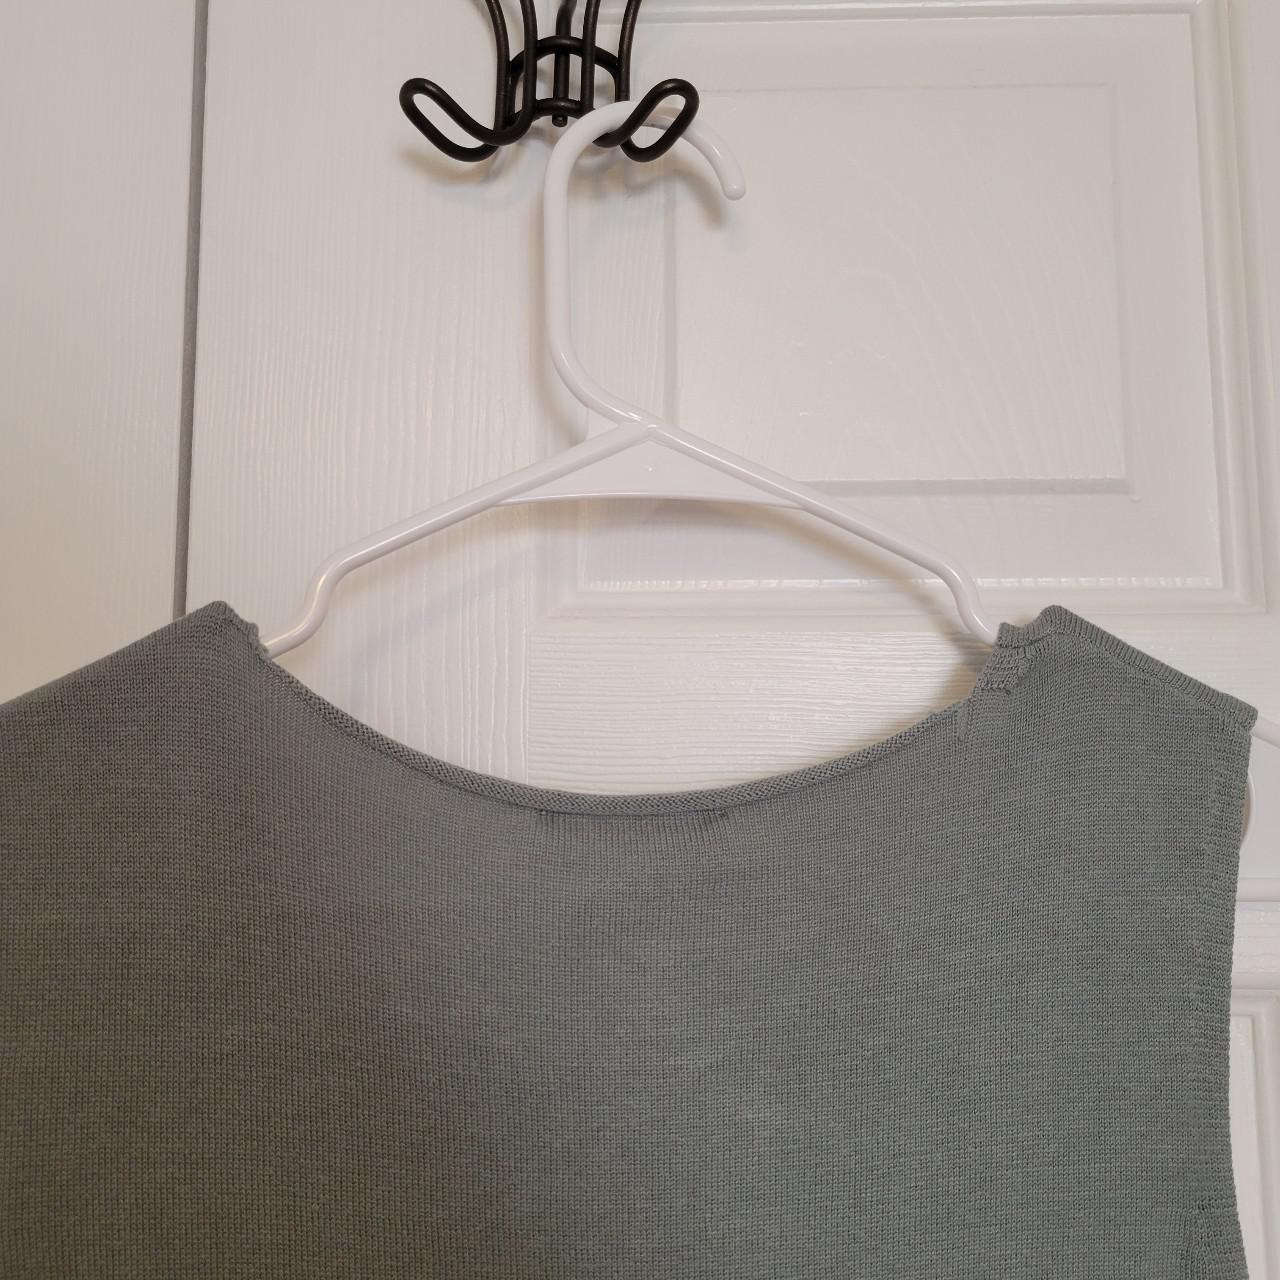 Product Image 4 - Coldwater Creek Tank Top

Cute tank